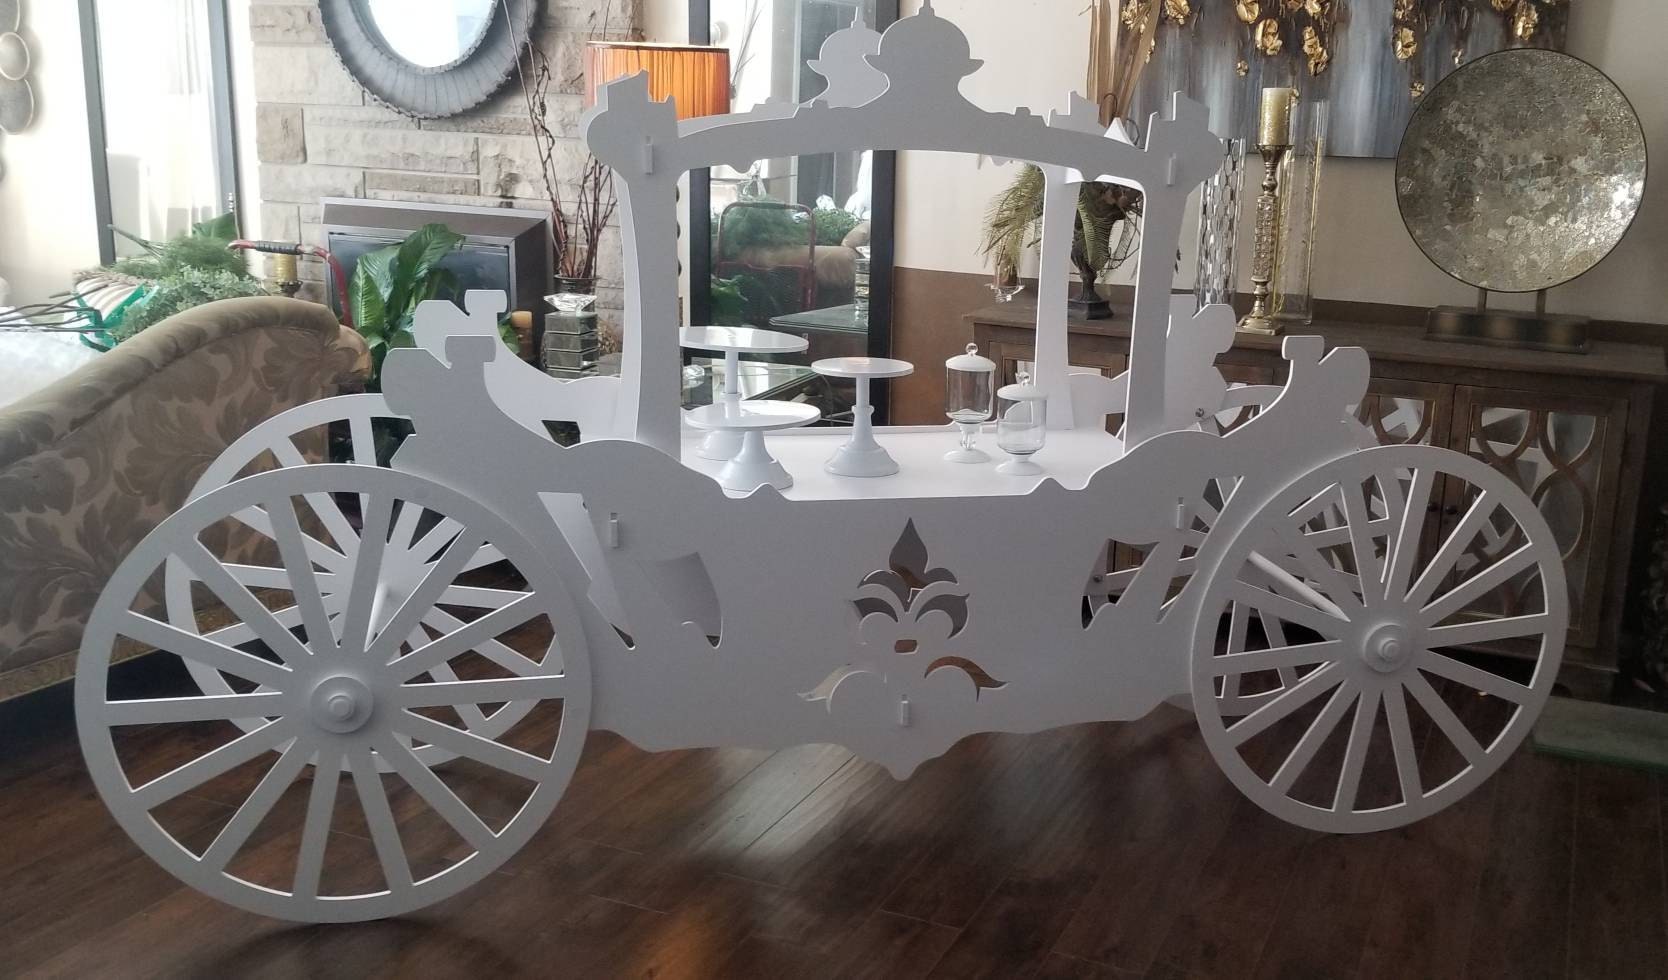 Candy Cart, Birthday, Baby Shower, Bridal Shower, Wedding, Celebration, Free Delivery Canada, Sweet Cart, Wheels, Adult, Cake Stand, Mini Bar, Party Decor, Wedding Decoration, Wedding Idea, Durable White PVC, Outdoor Event, Collapsible,